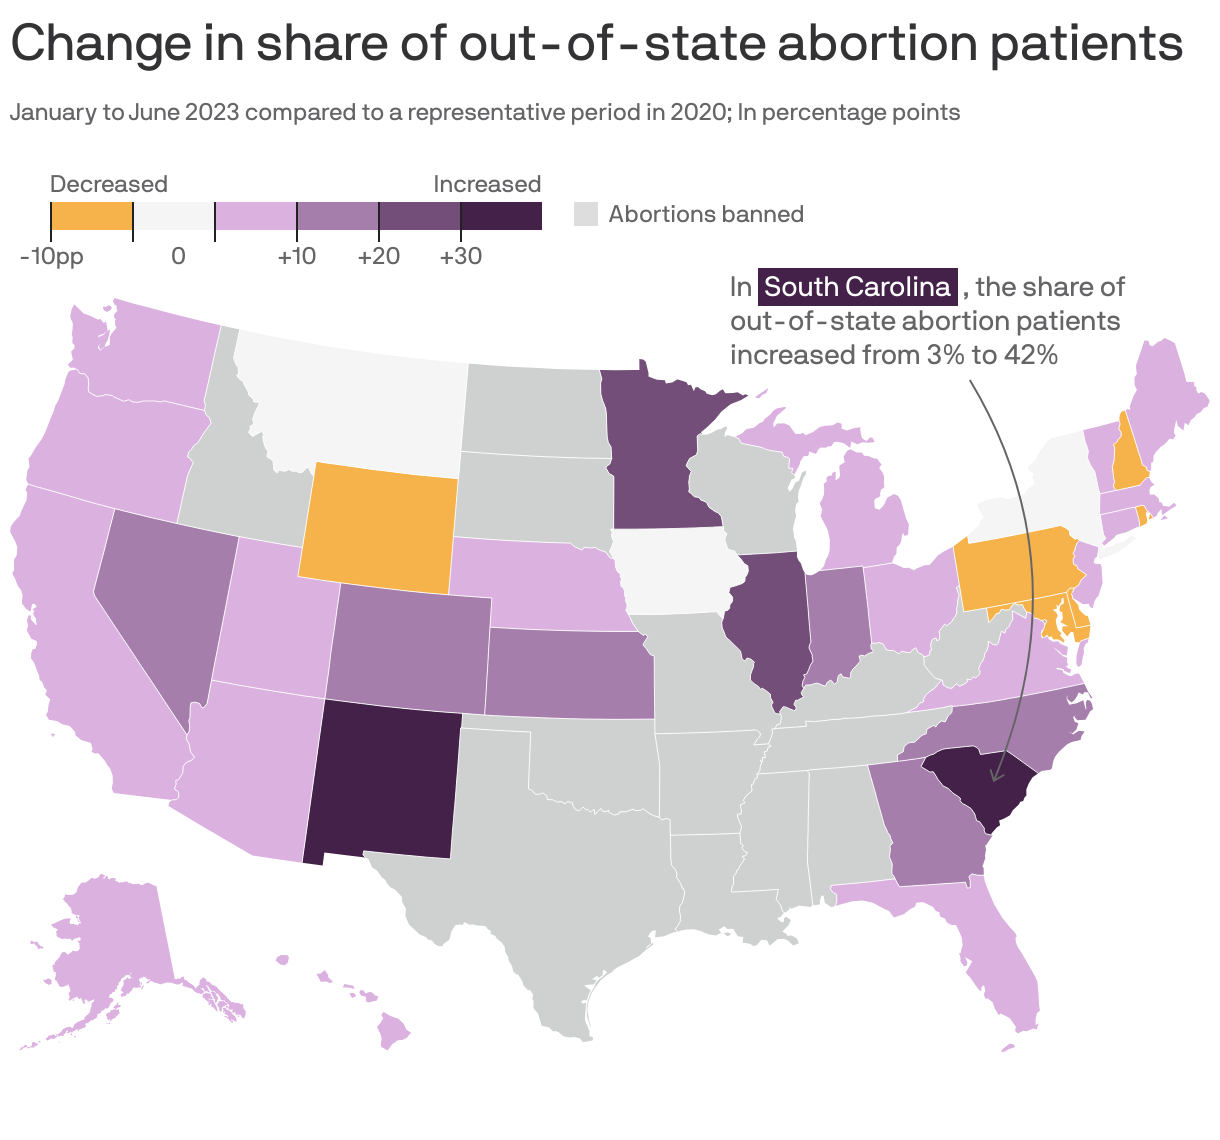 Change in share of out-of-state abortion patients